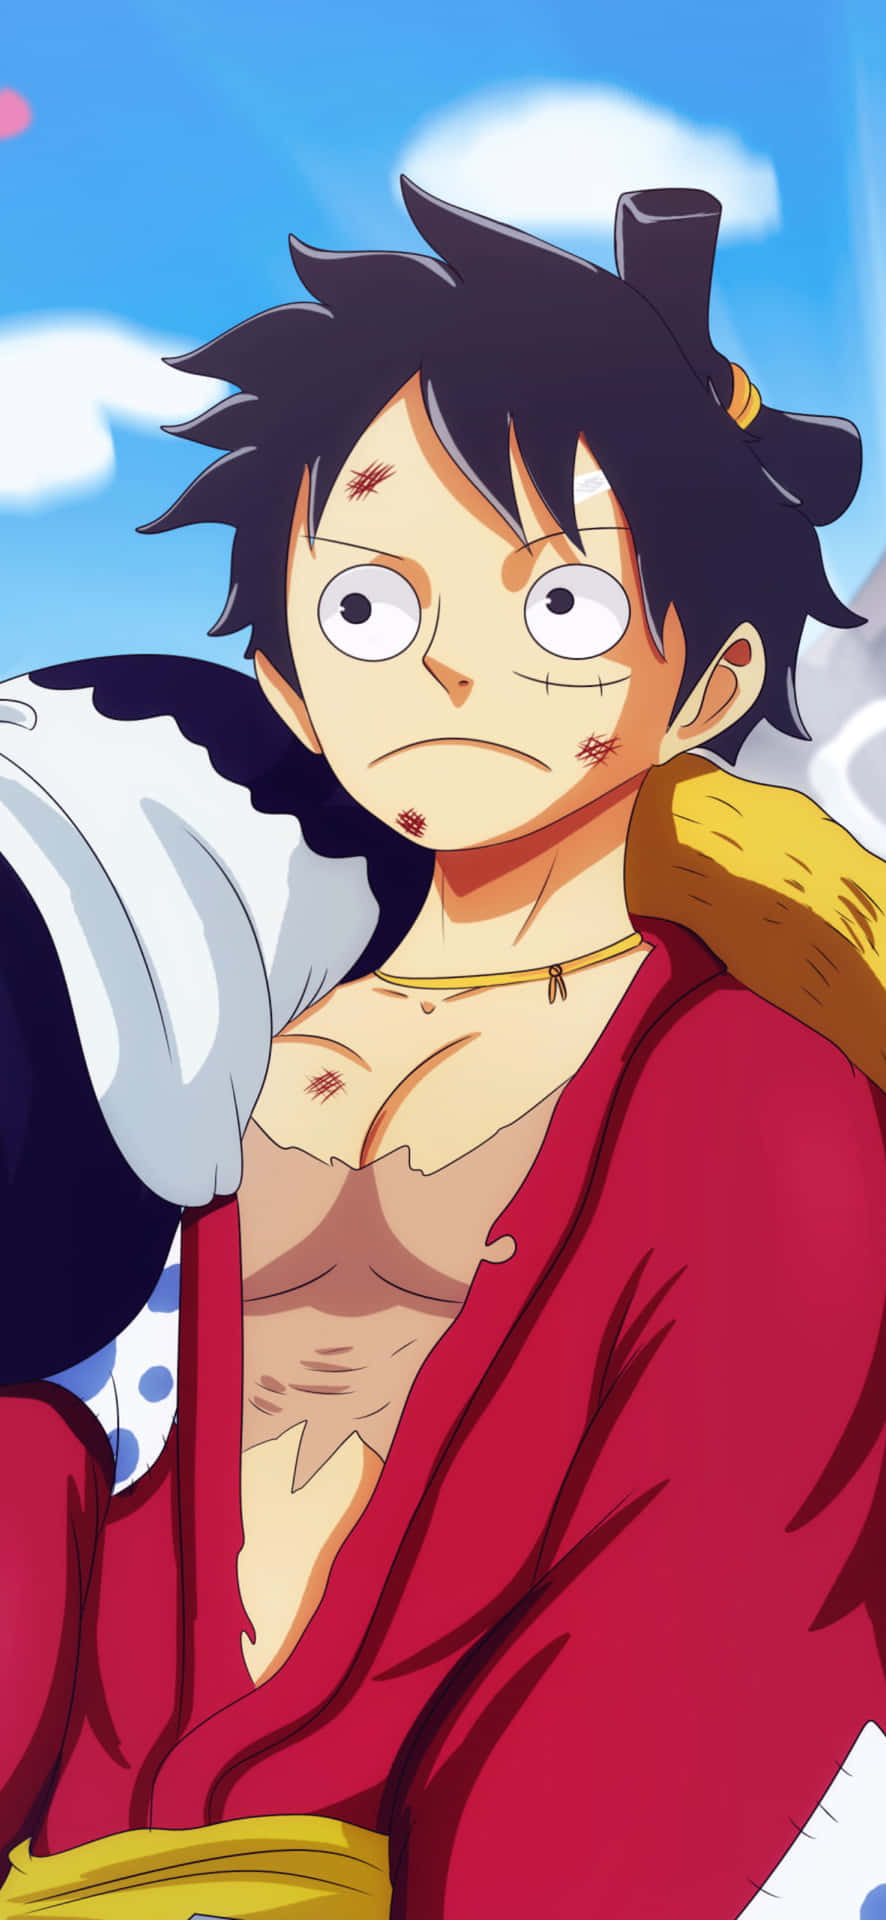 Luffy from the wildly popular anime series, One Piece displayed on the iconic iPhone. Wallpaper